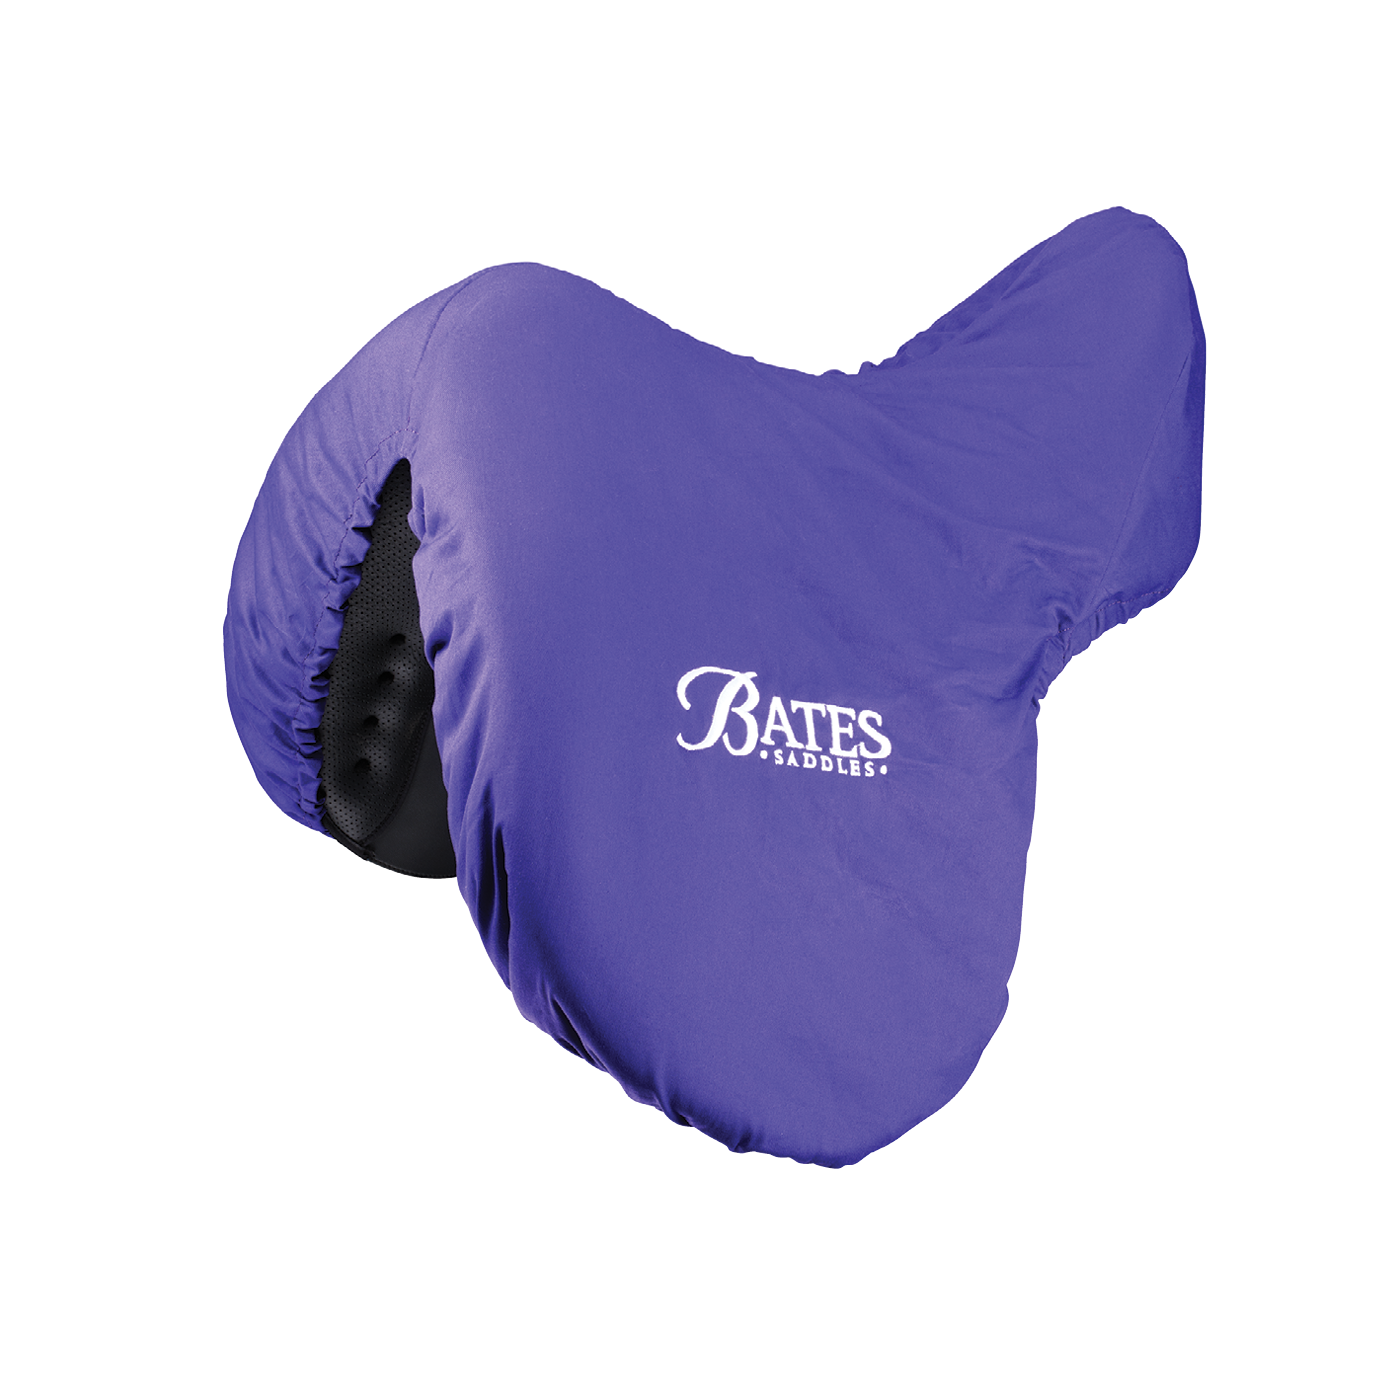 Bates Deluxe Saddle Cover - 619:32593784701024